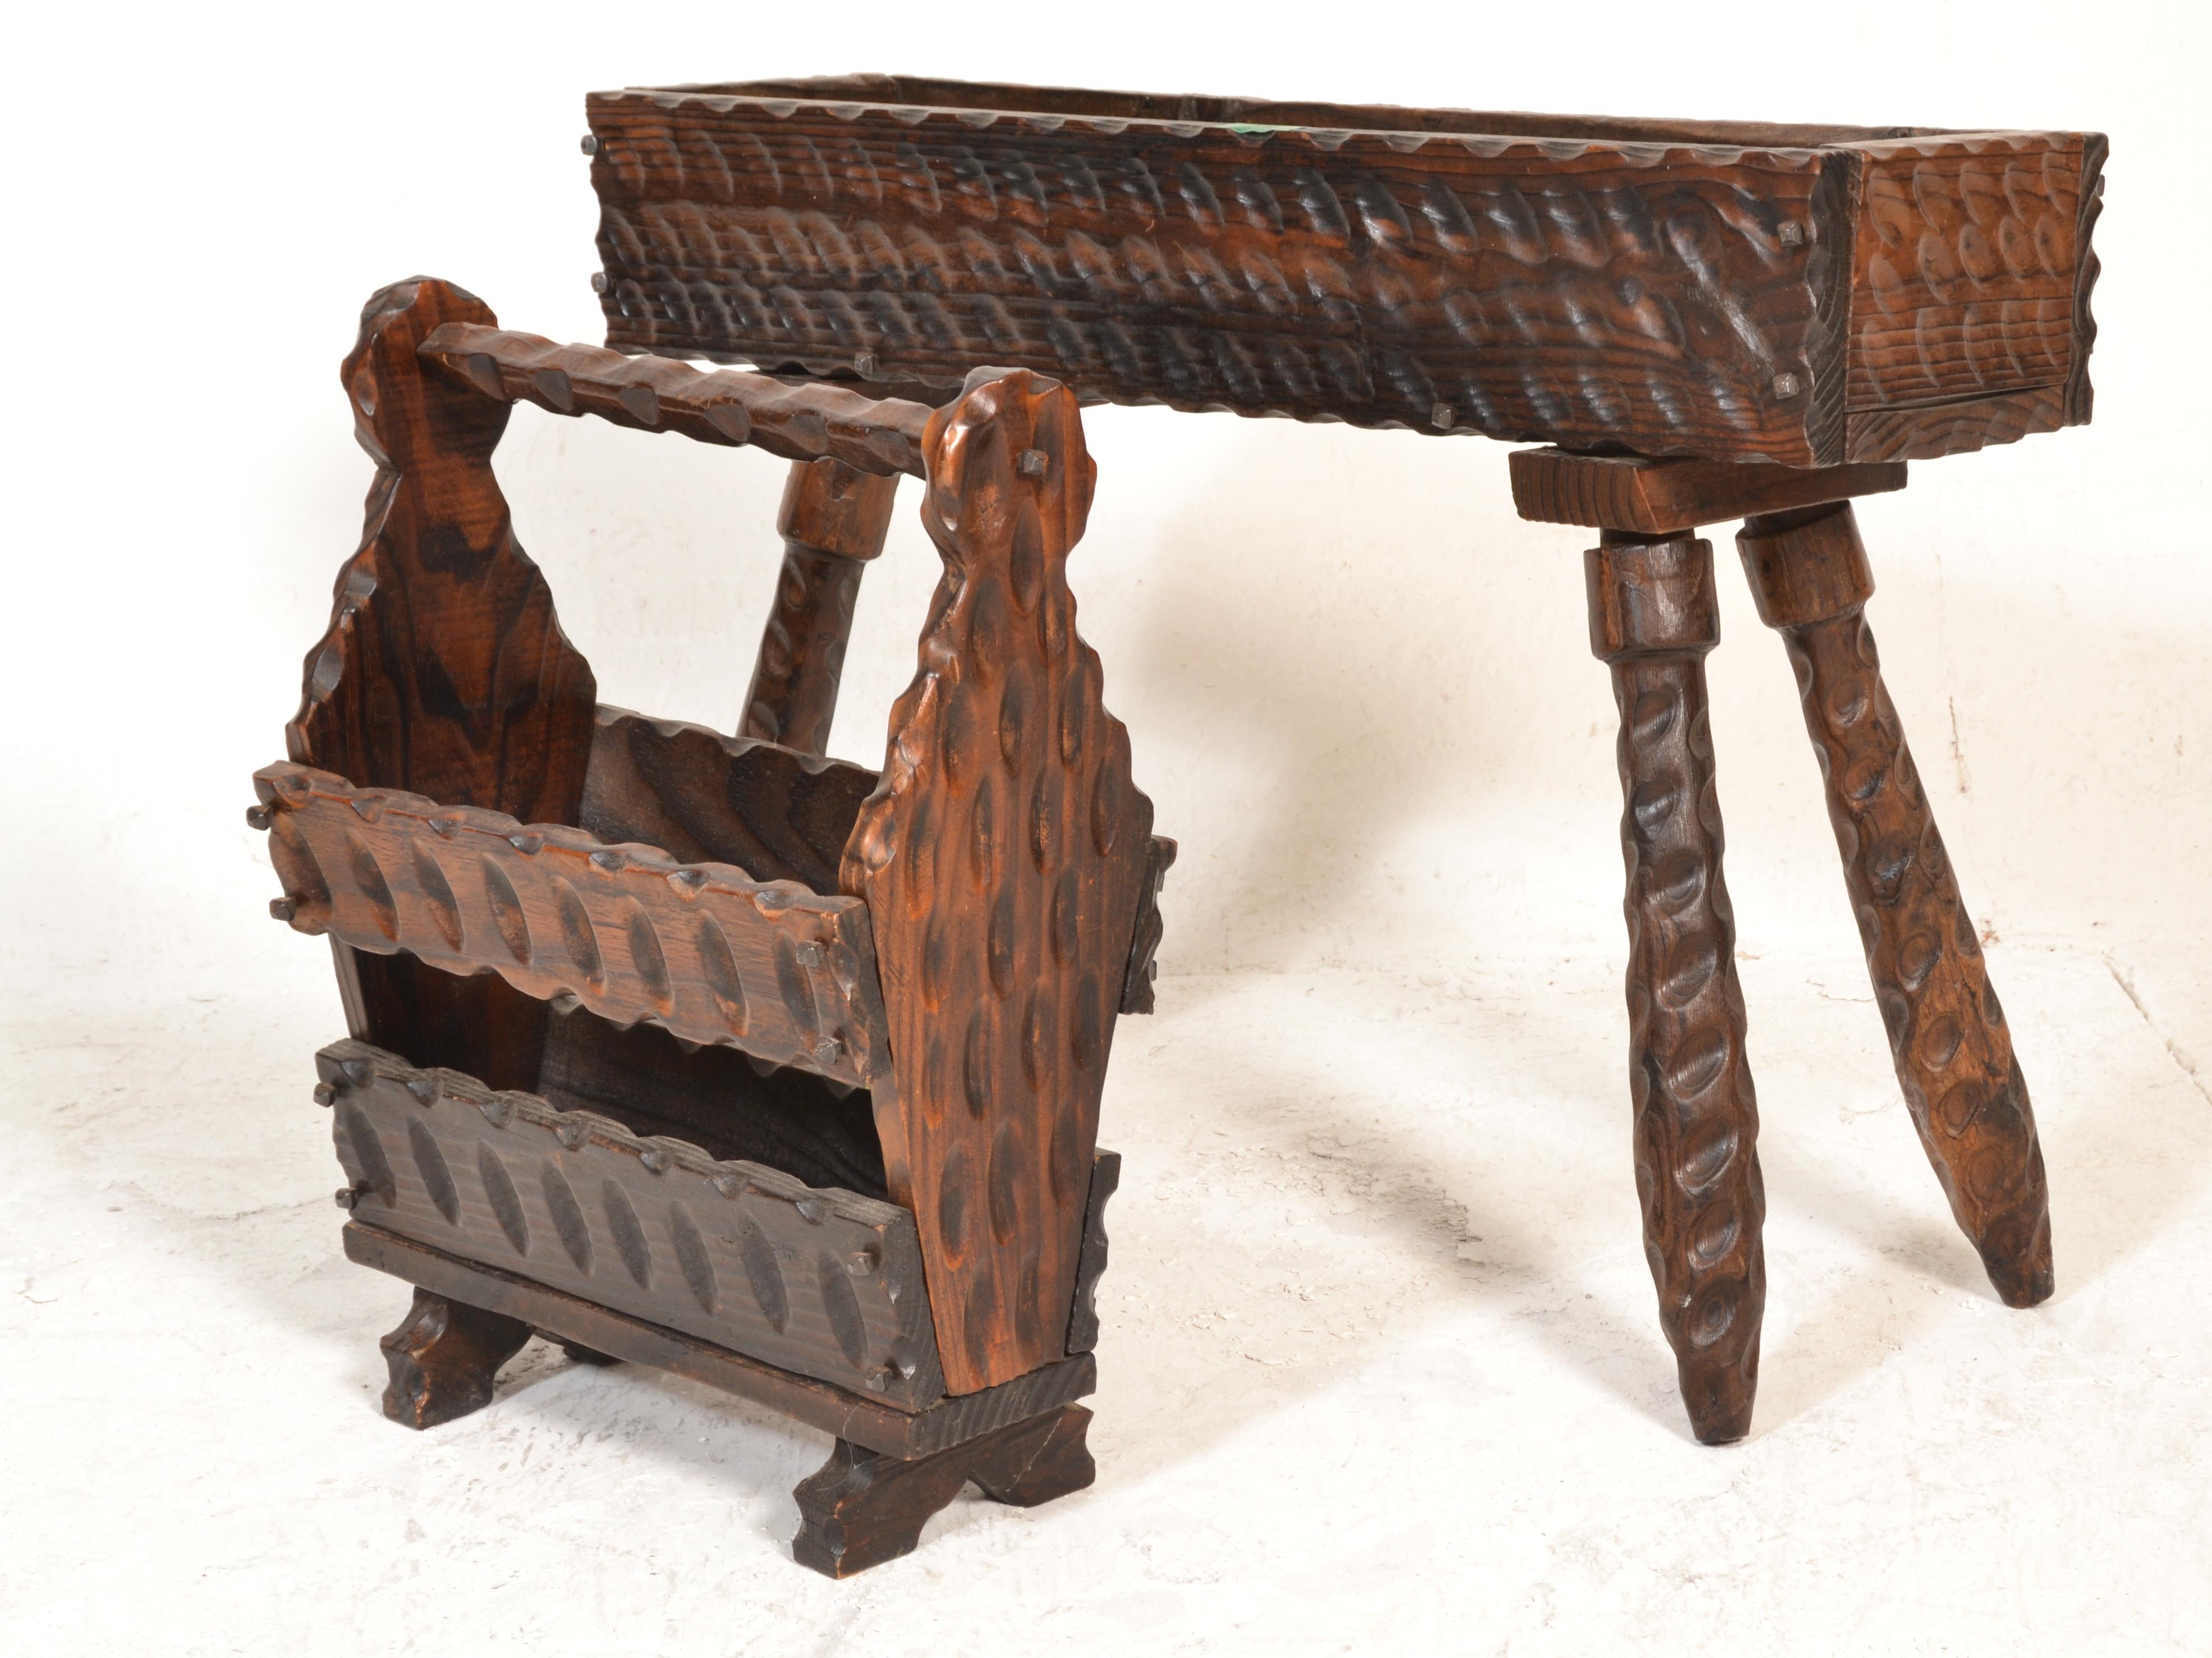 A rustic mid to early 20th century continental German black forest oak planter stand and magazine